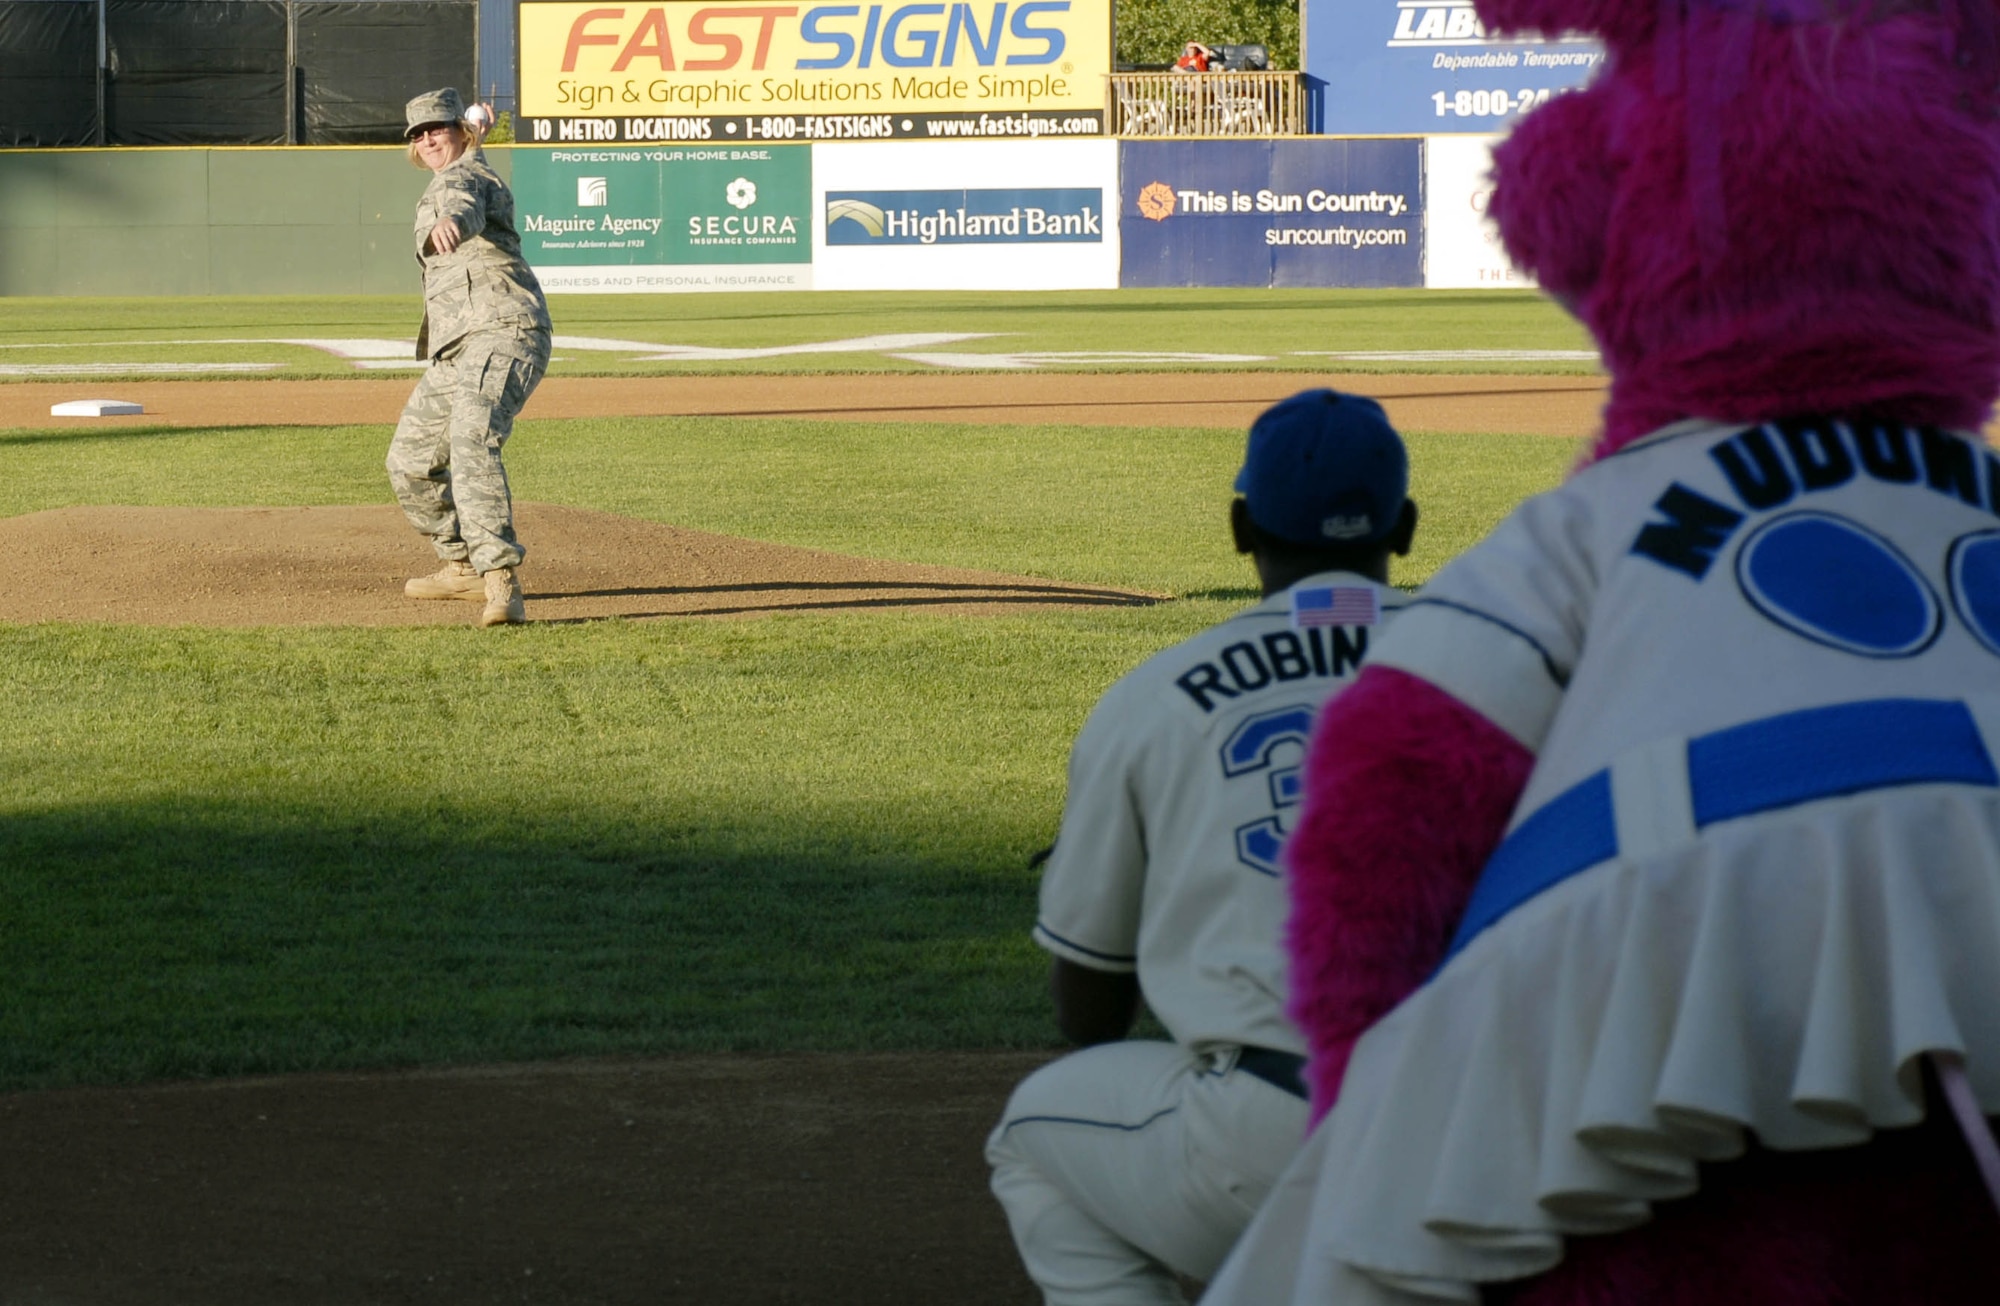 Tech. Sgt. Suzzanne Harwood, 934th Airlift Wing NCO of the Year, throws out the first pitch at a St. Paul Saints baseball game Aug. 7.  Sergeant Harwood serves as the wing career advisor at the 934th and also assisted recruiters promoting the Air Force Reserve at the game.
(Air Force Photo/Master Sgt. Paul Zadach).